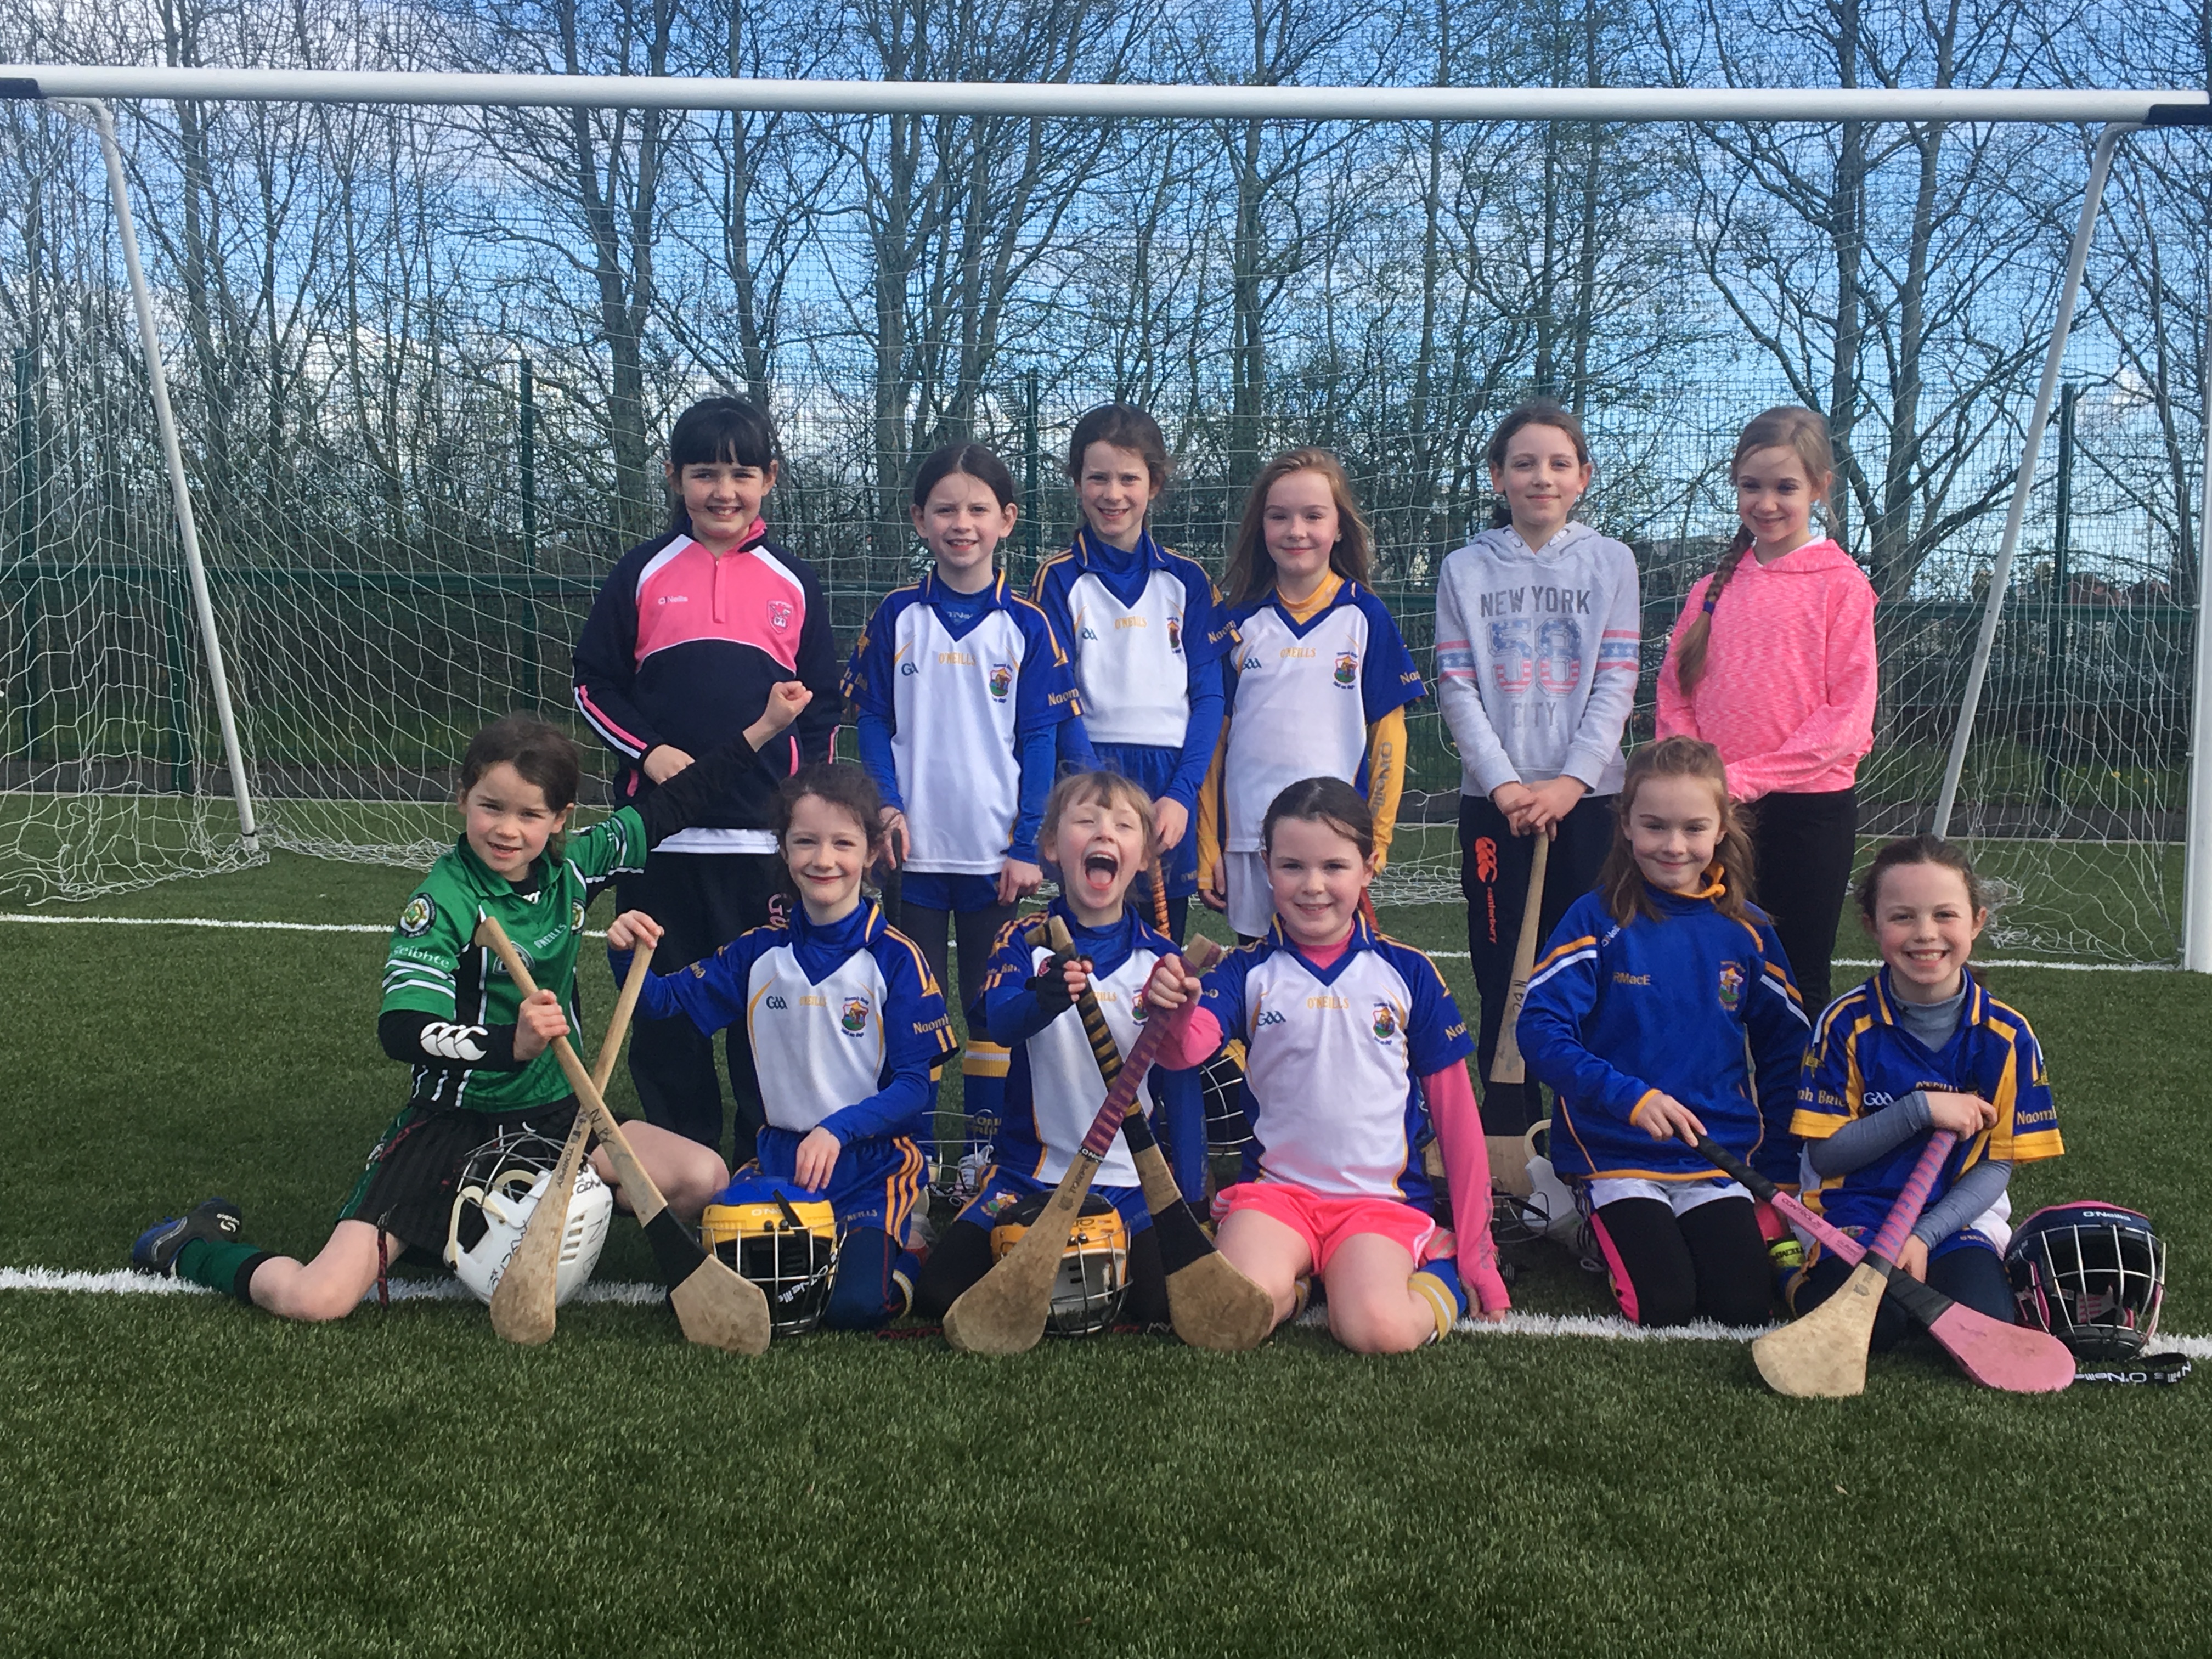 Camogie & hurling training for P1/7 at Musgrave Park 6:30- 7:30 pm Mondays